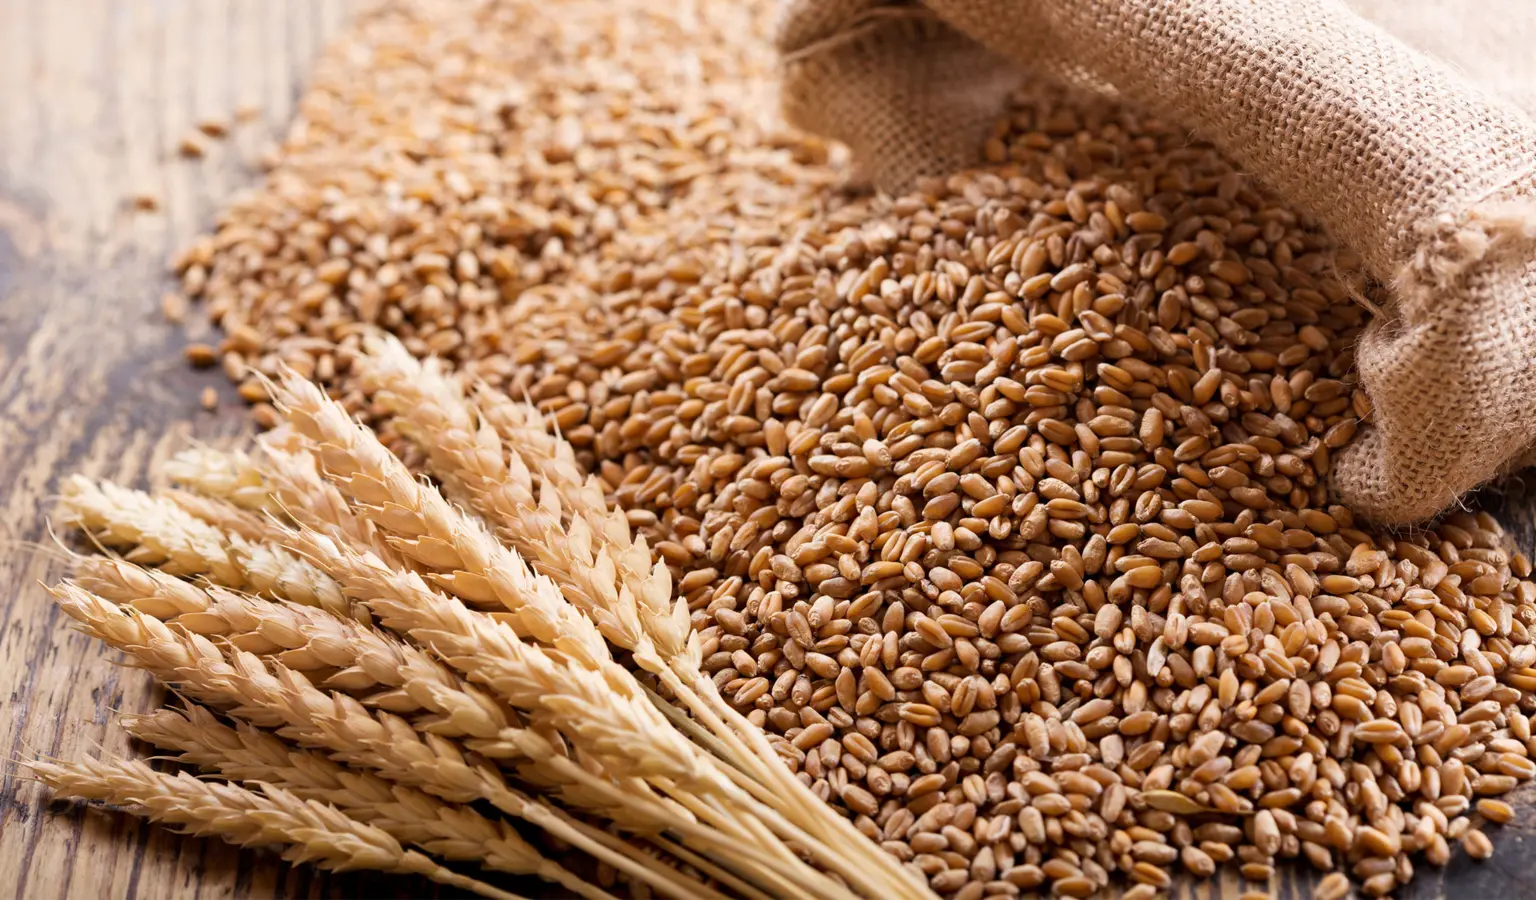 Wheat sitting on top of grains